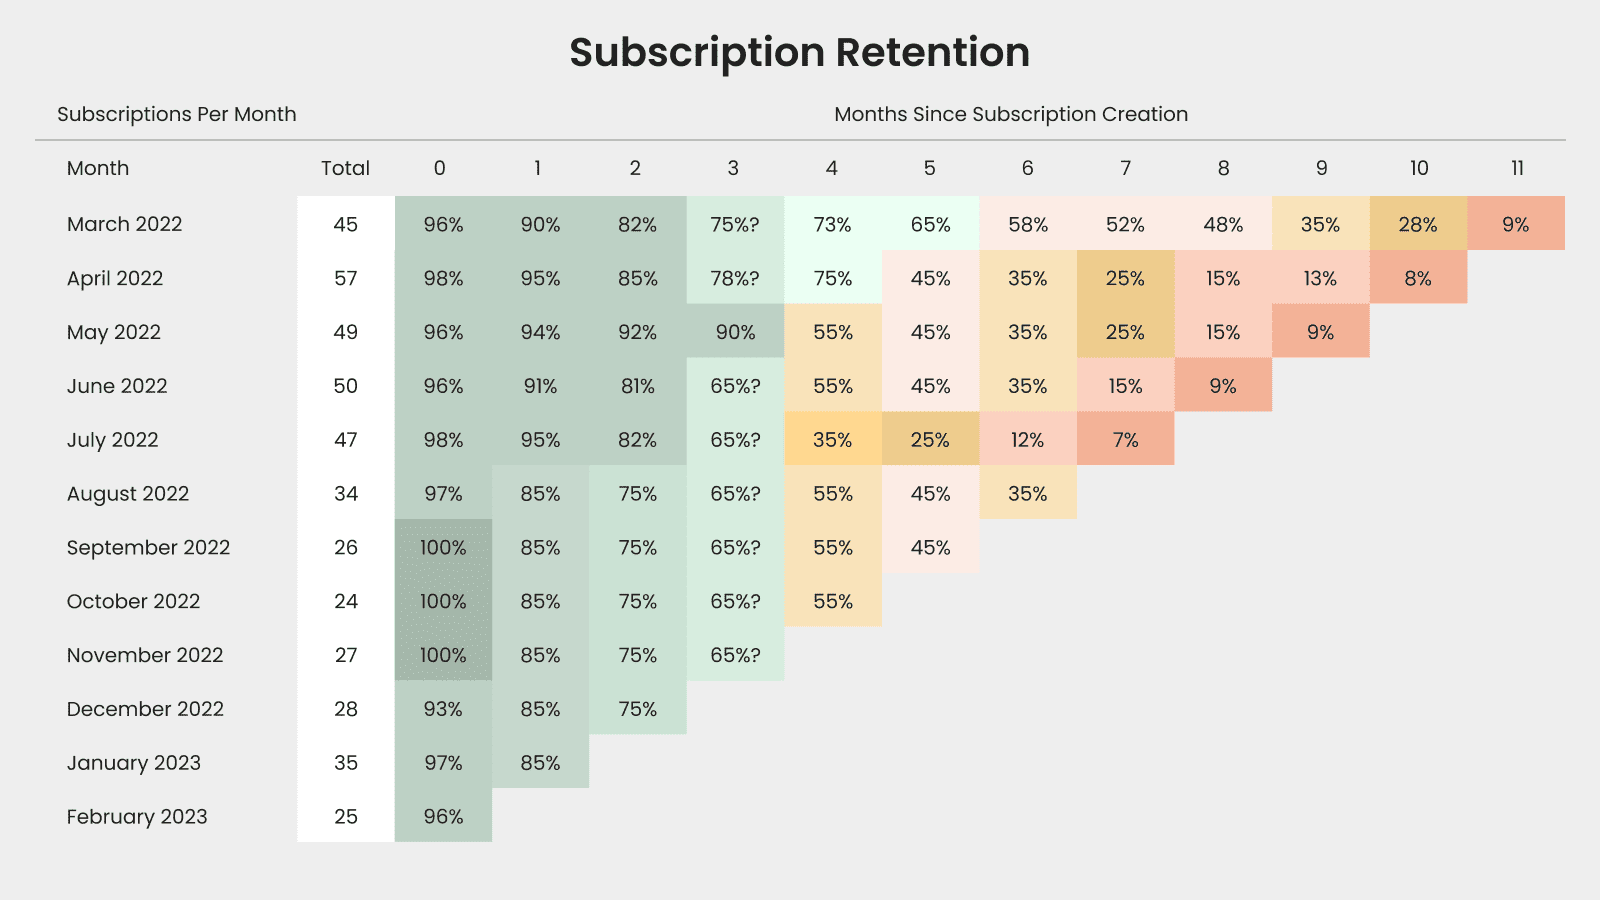 A graph showing subscriptions per month and months since subscription creation.